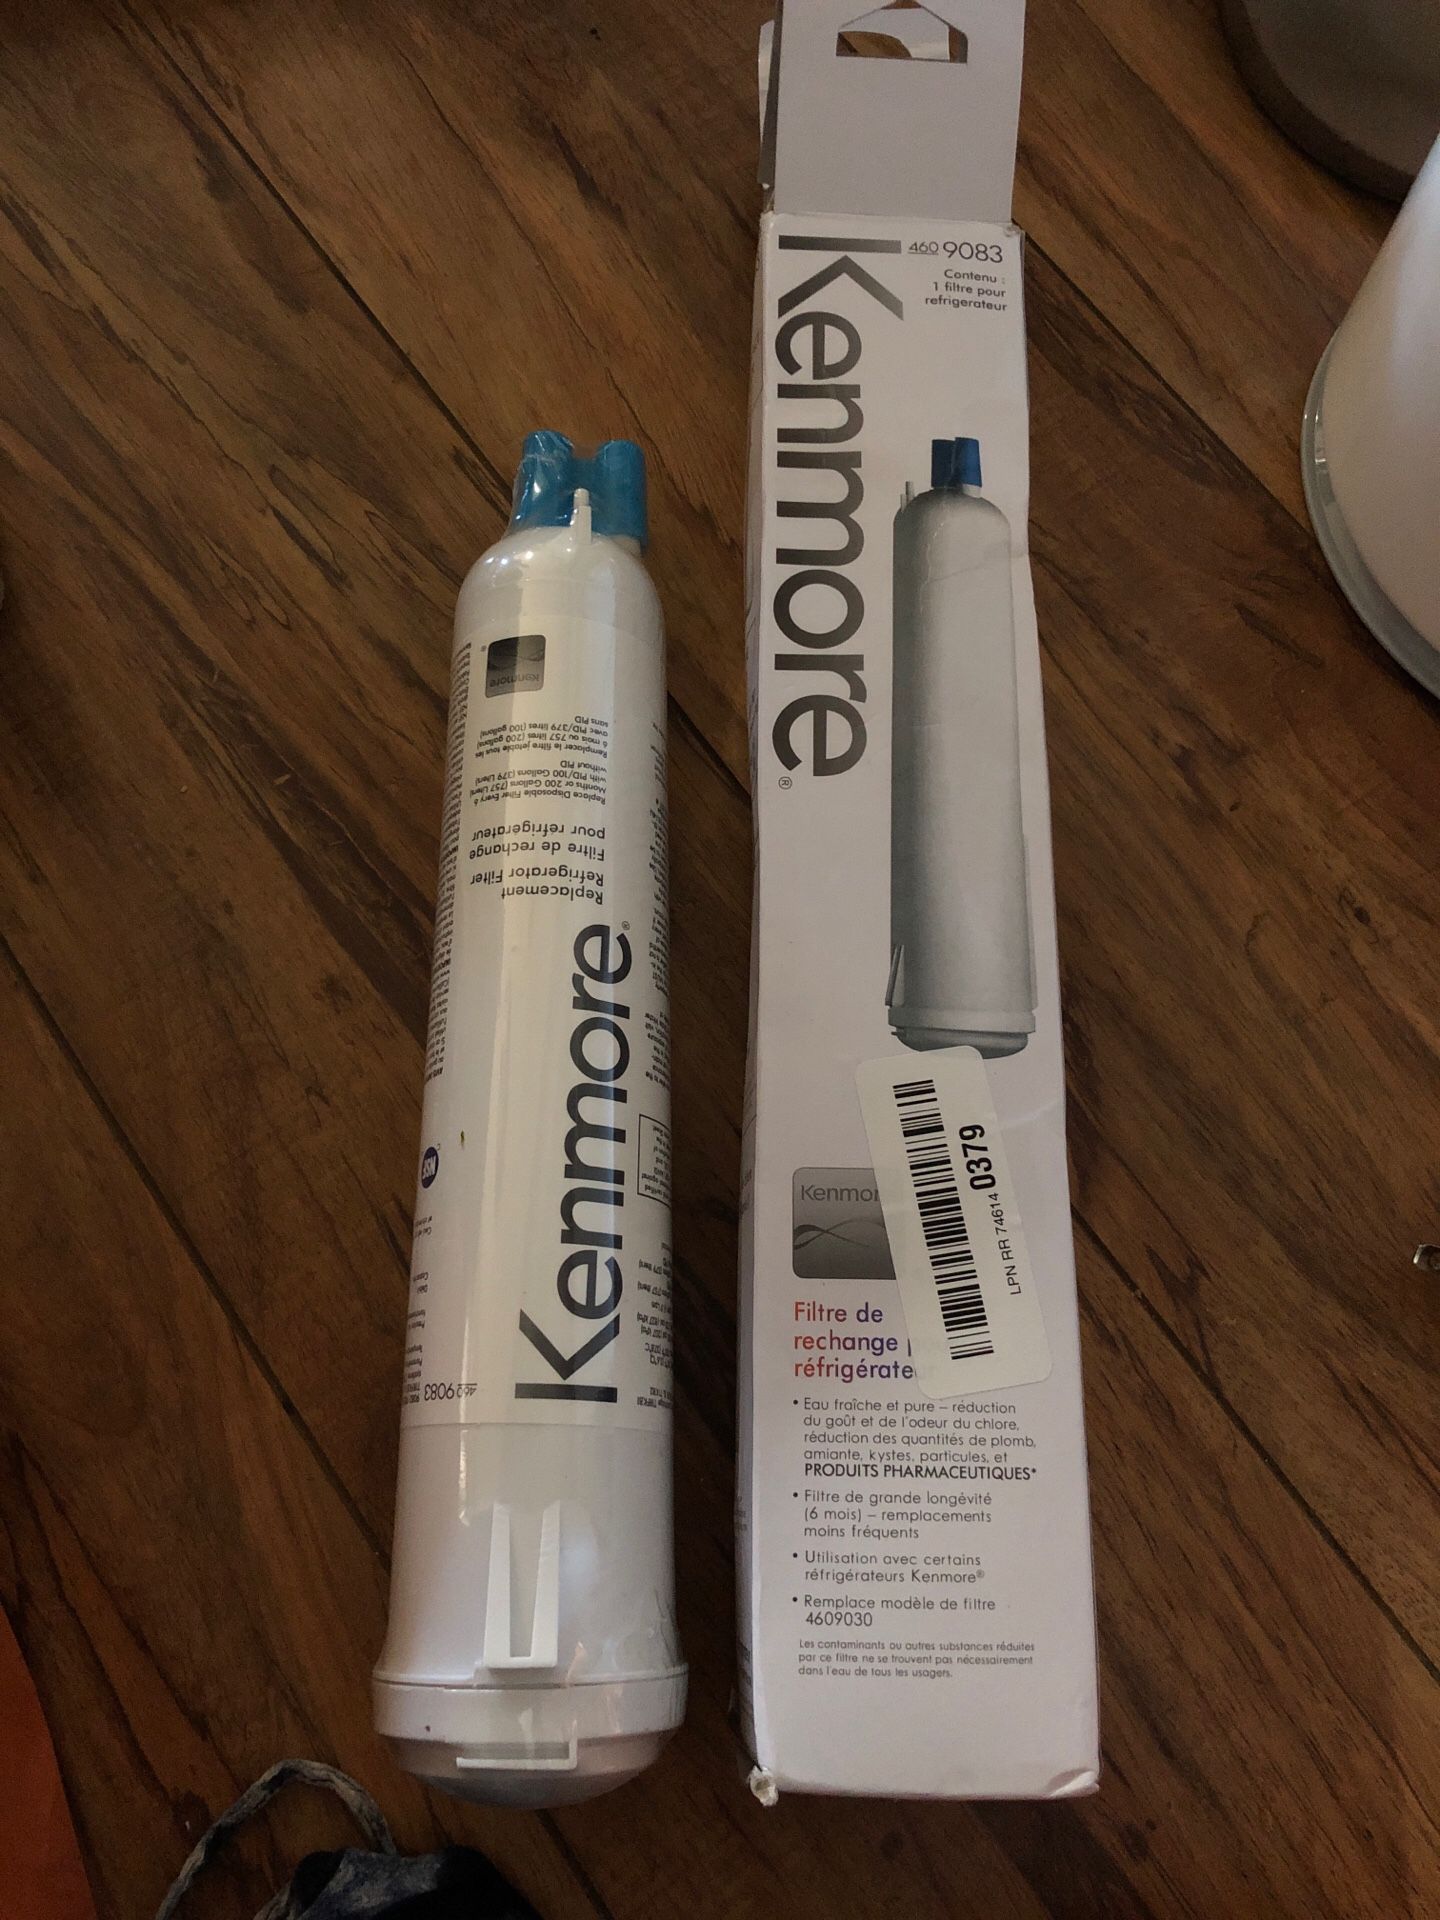 Kenmore (contact info removed) refrigerator filter